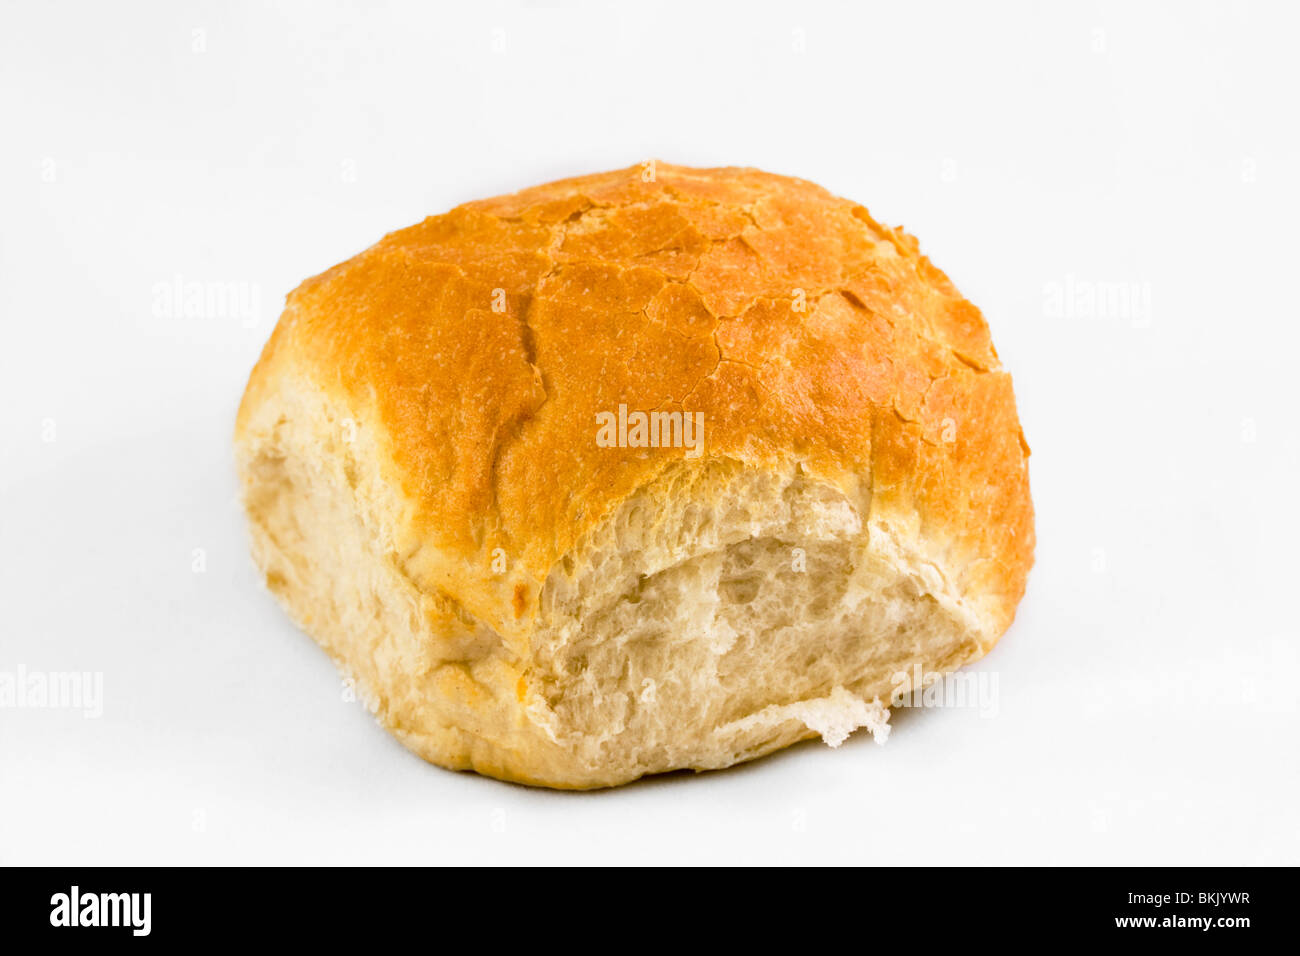 crusty bread roll on a white background Stock Photo